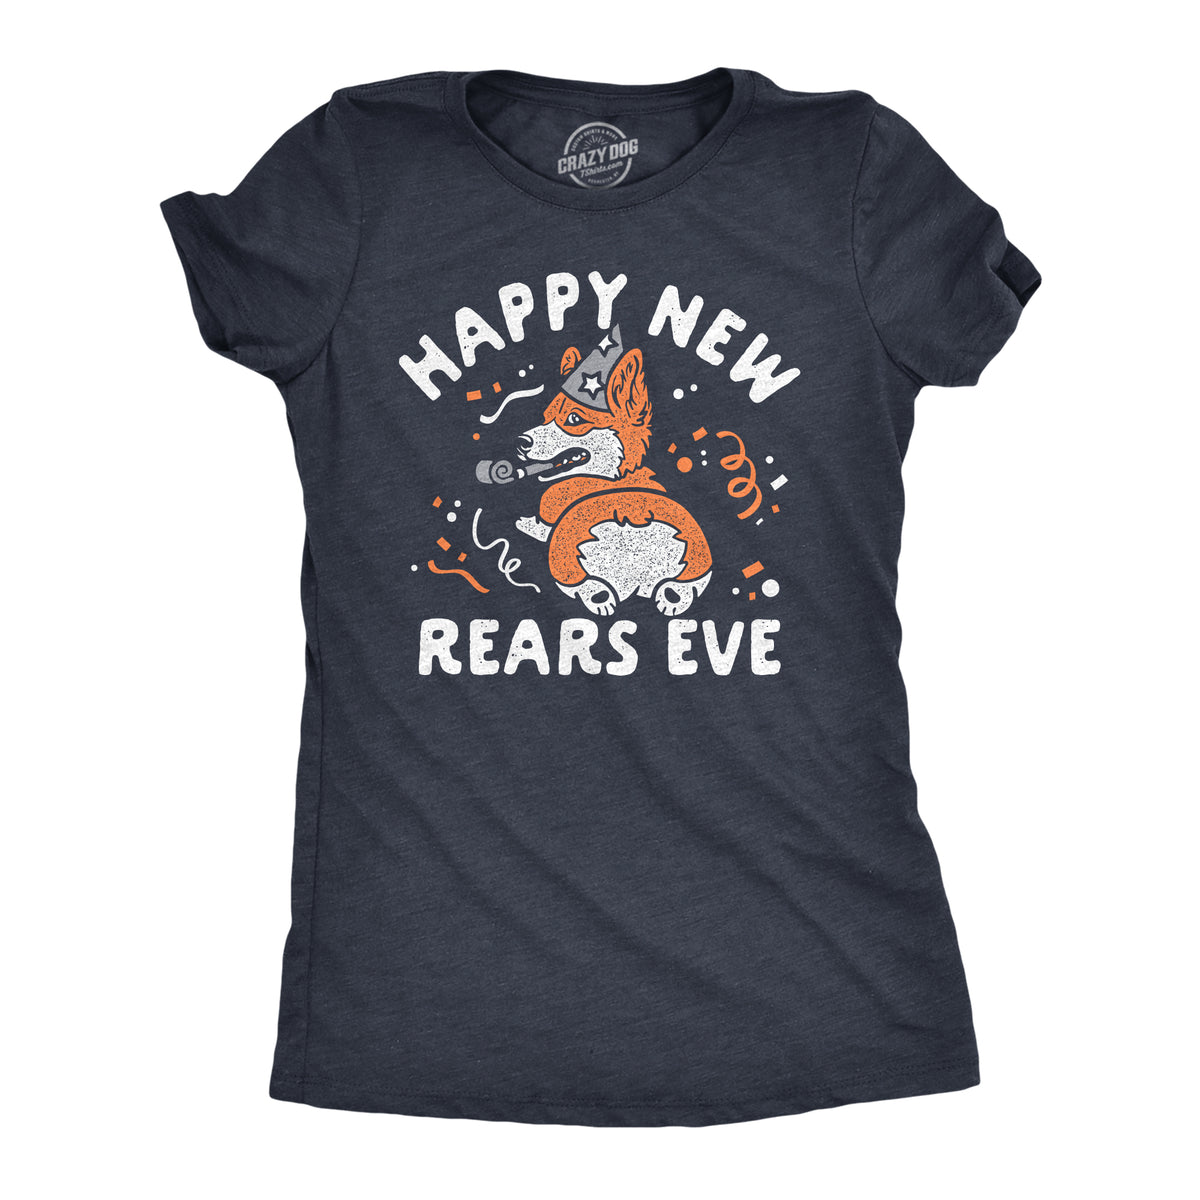 Funny Heather Navy - REARS Happy New Rears Eve Womens T Shirt Nerdy New Years Dog sarcastic Tee